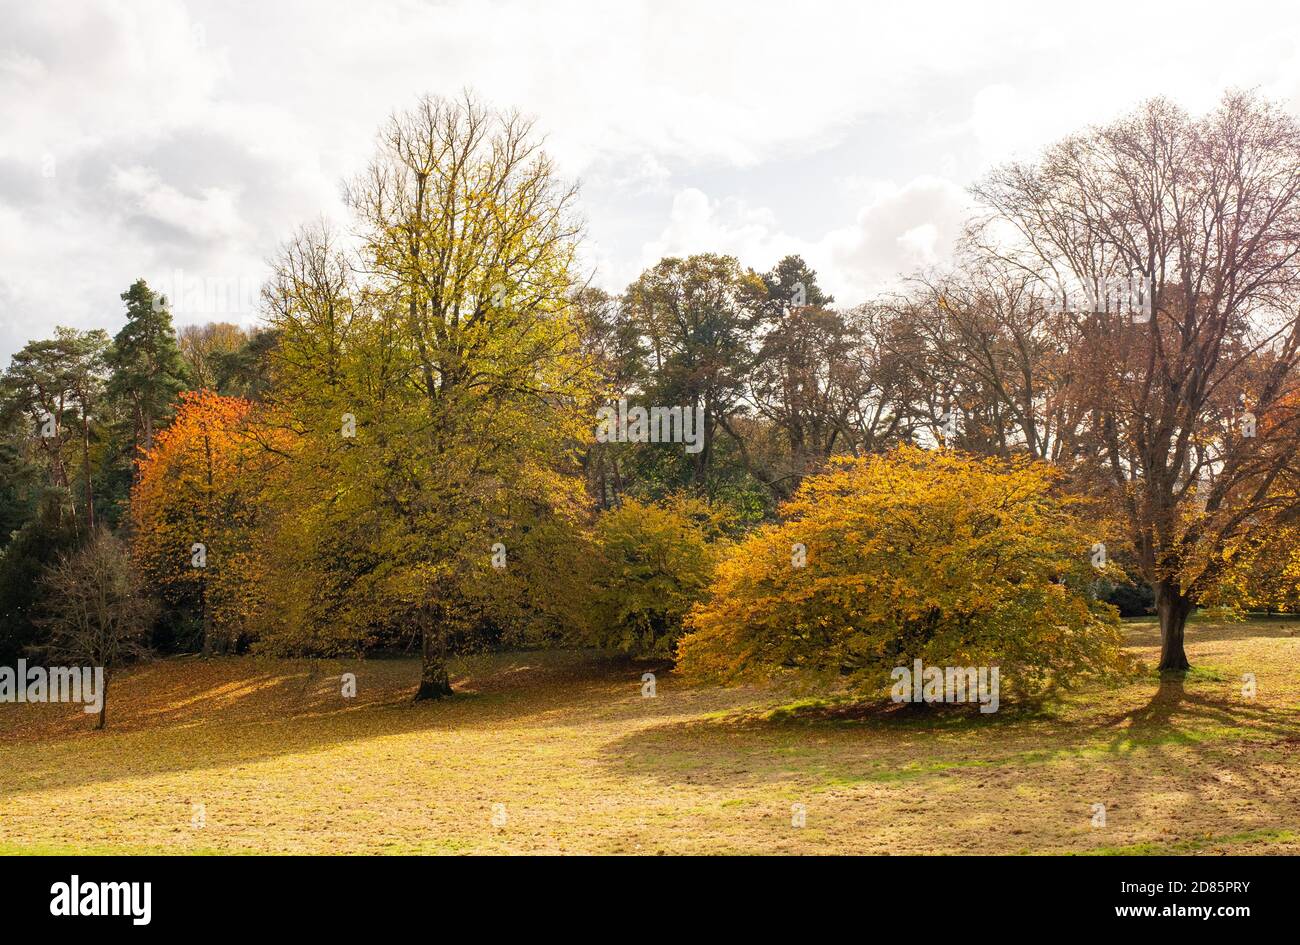 The full colour of autumnal leaves on the trees at Batsford Arboretum. Stock Photo